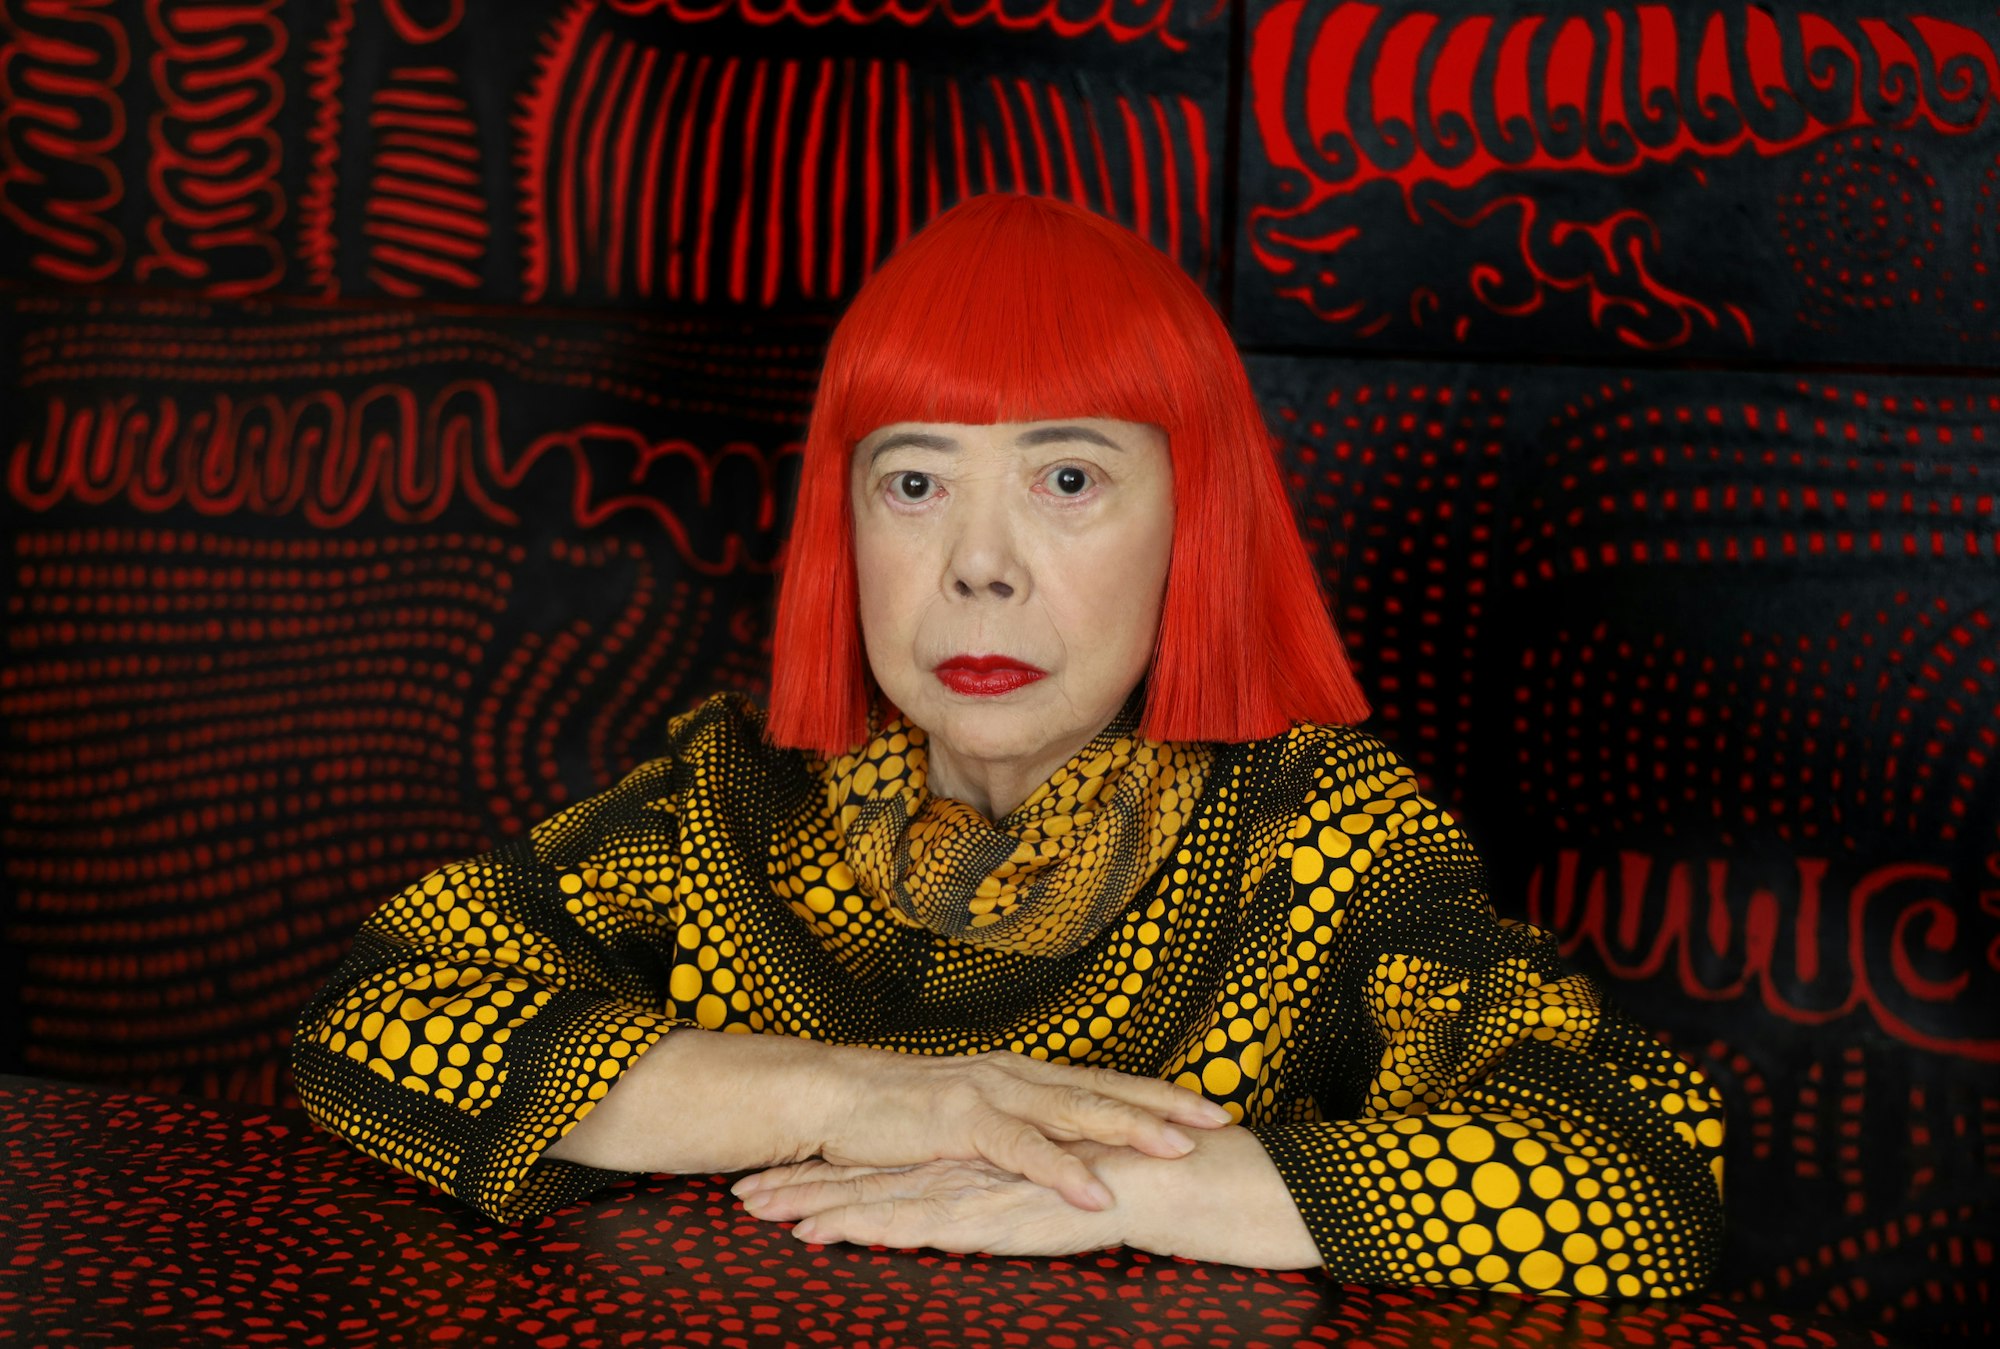 A person with bright red bobbed hair and a yellow-spotted black top  in a red and black patterned space.